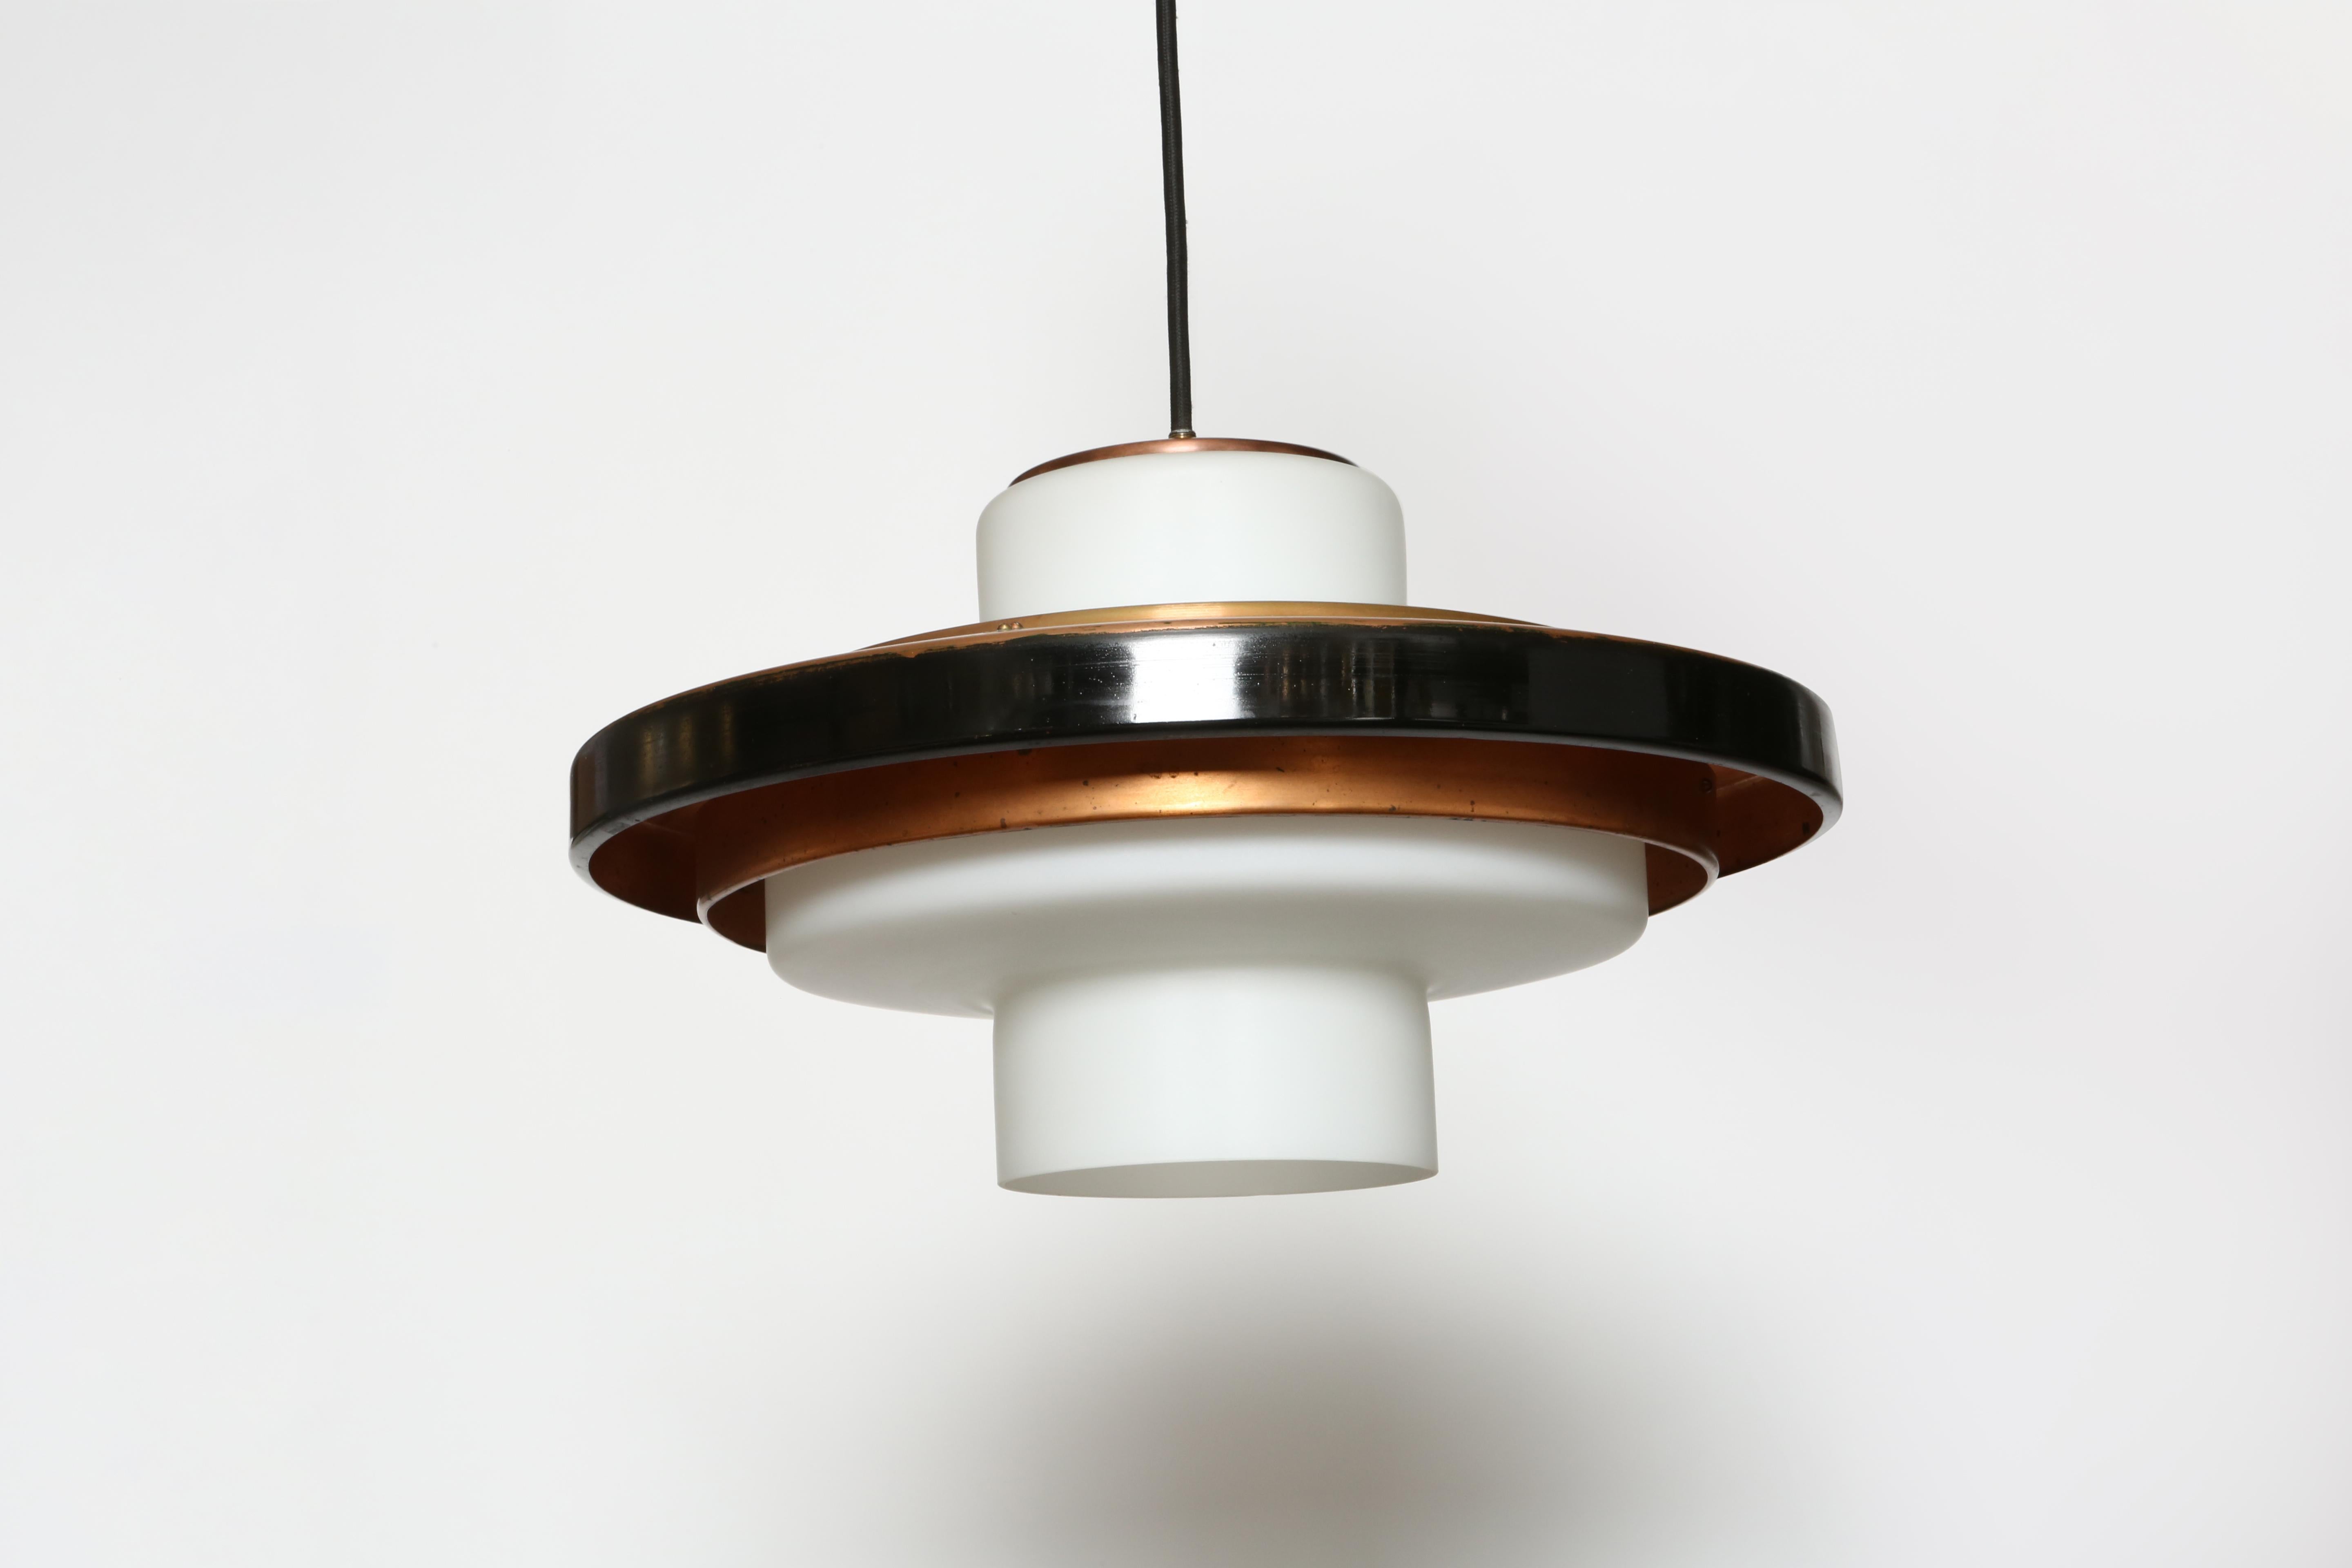 Stilnovo Ceiling Pendant Model 1219, a pair In Good Condition For Sale In Brooklyn, NY